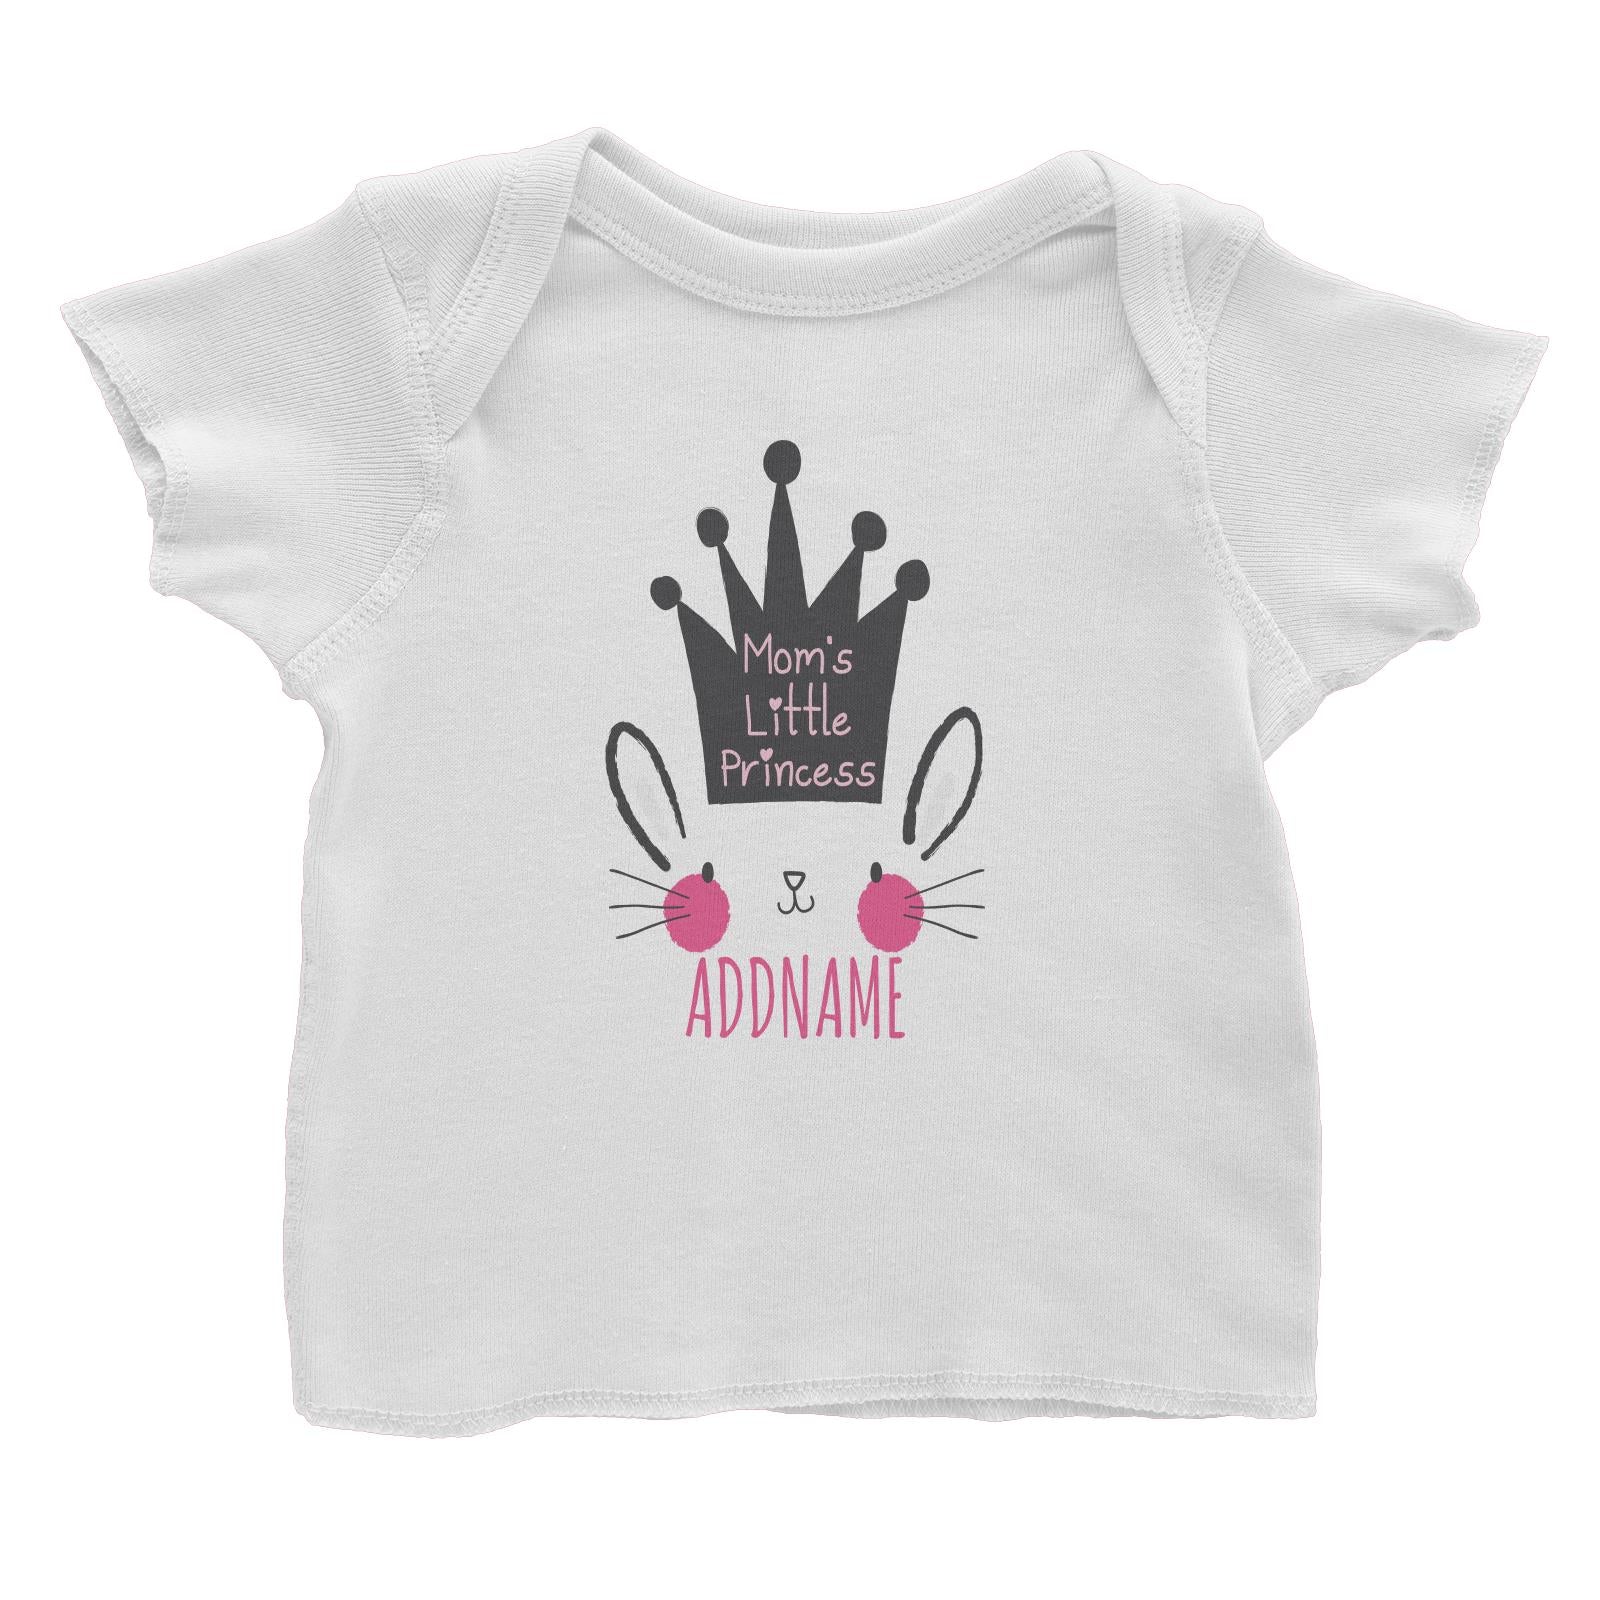 Mom's Little Princess Bunny Addname White Baby T-Shirt